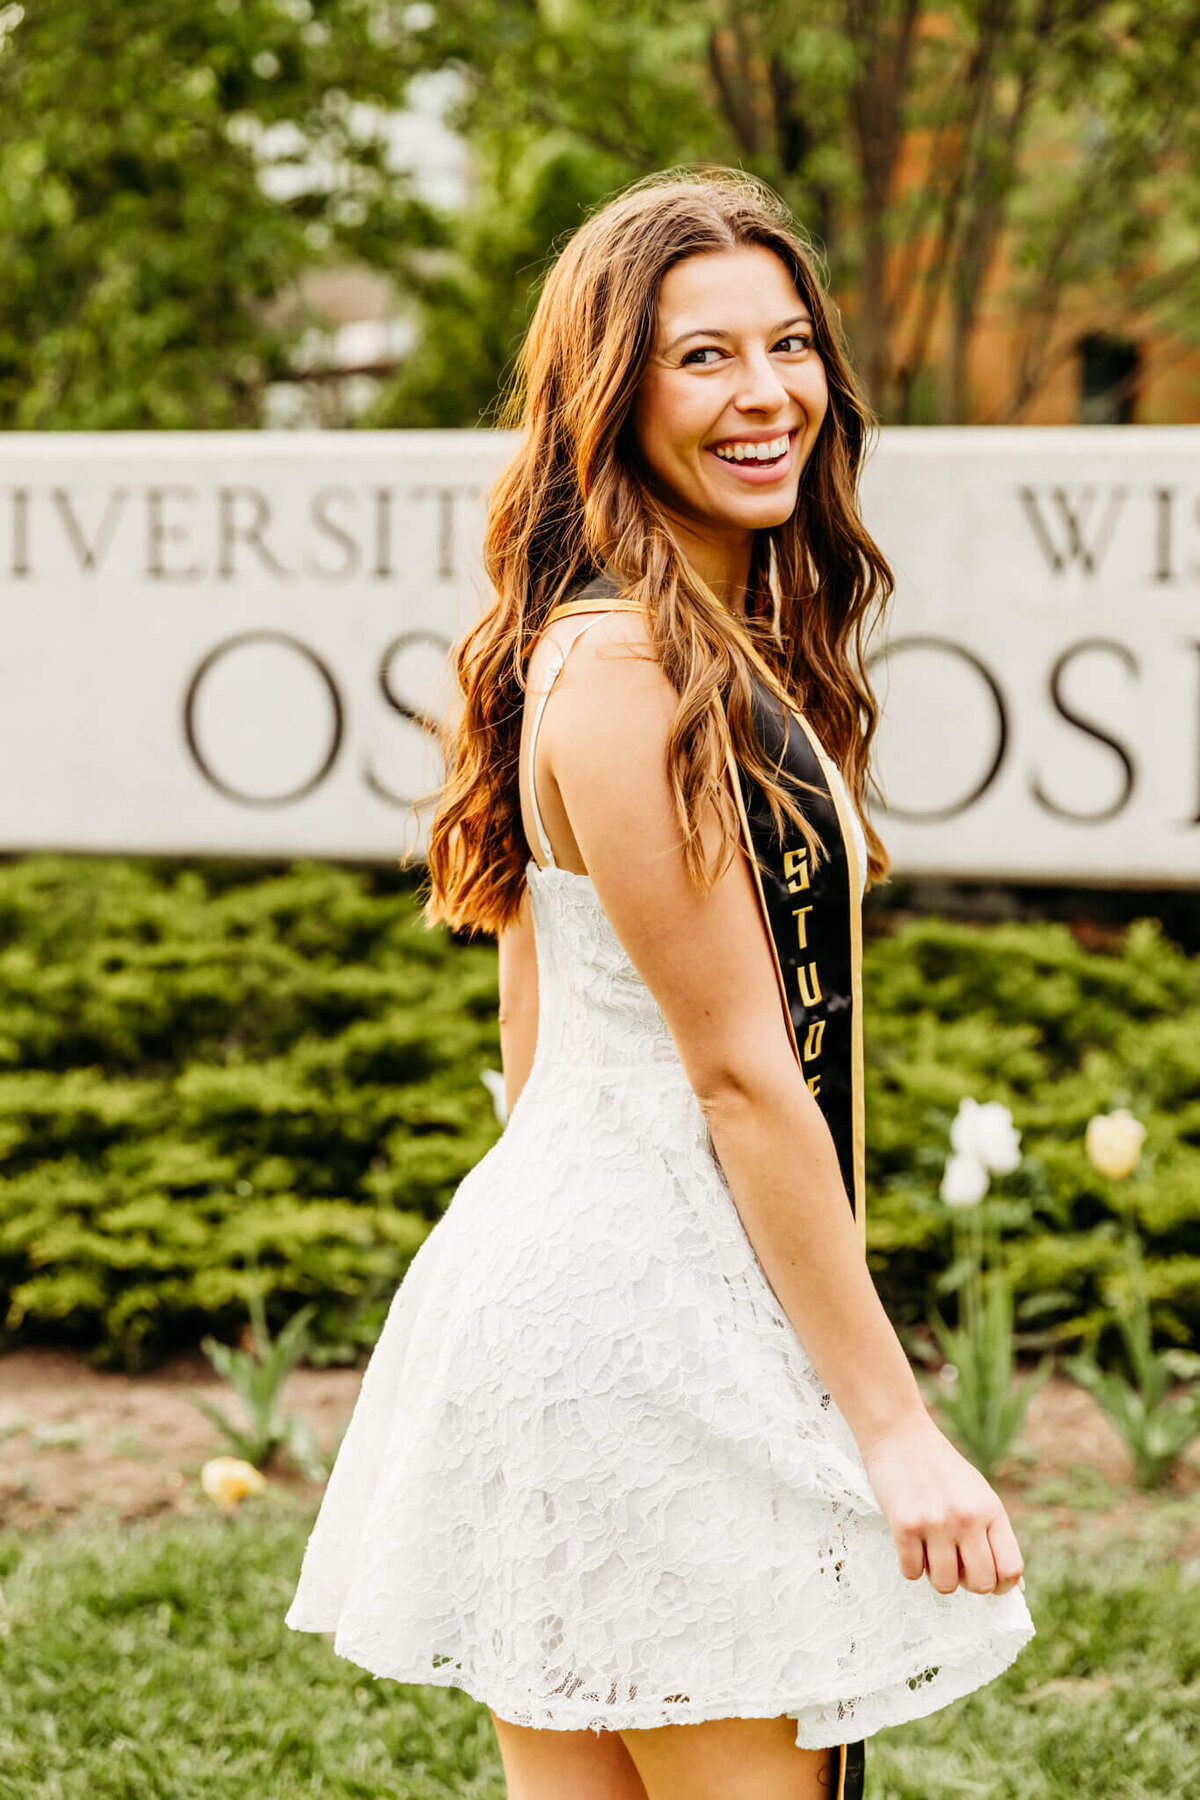 Stunning woman celebrating her college graduation while wearing a white lace dress and laughing on UW Oshkosh campus